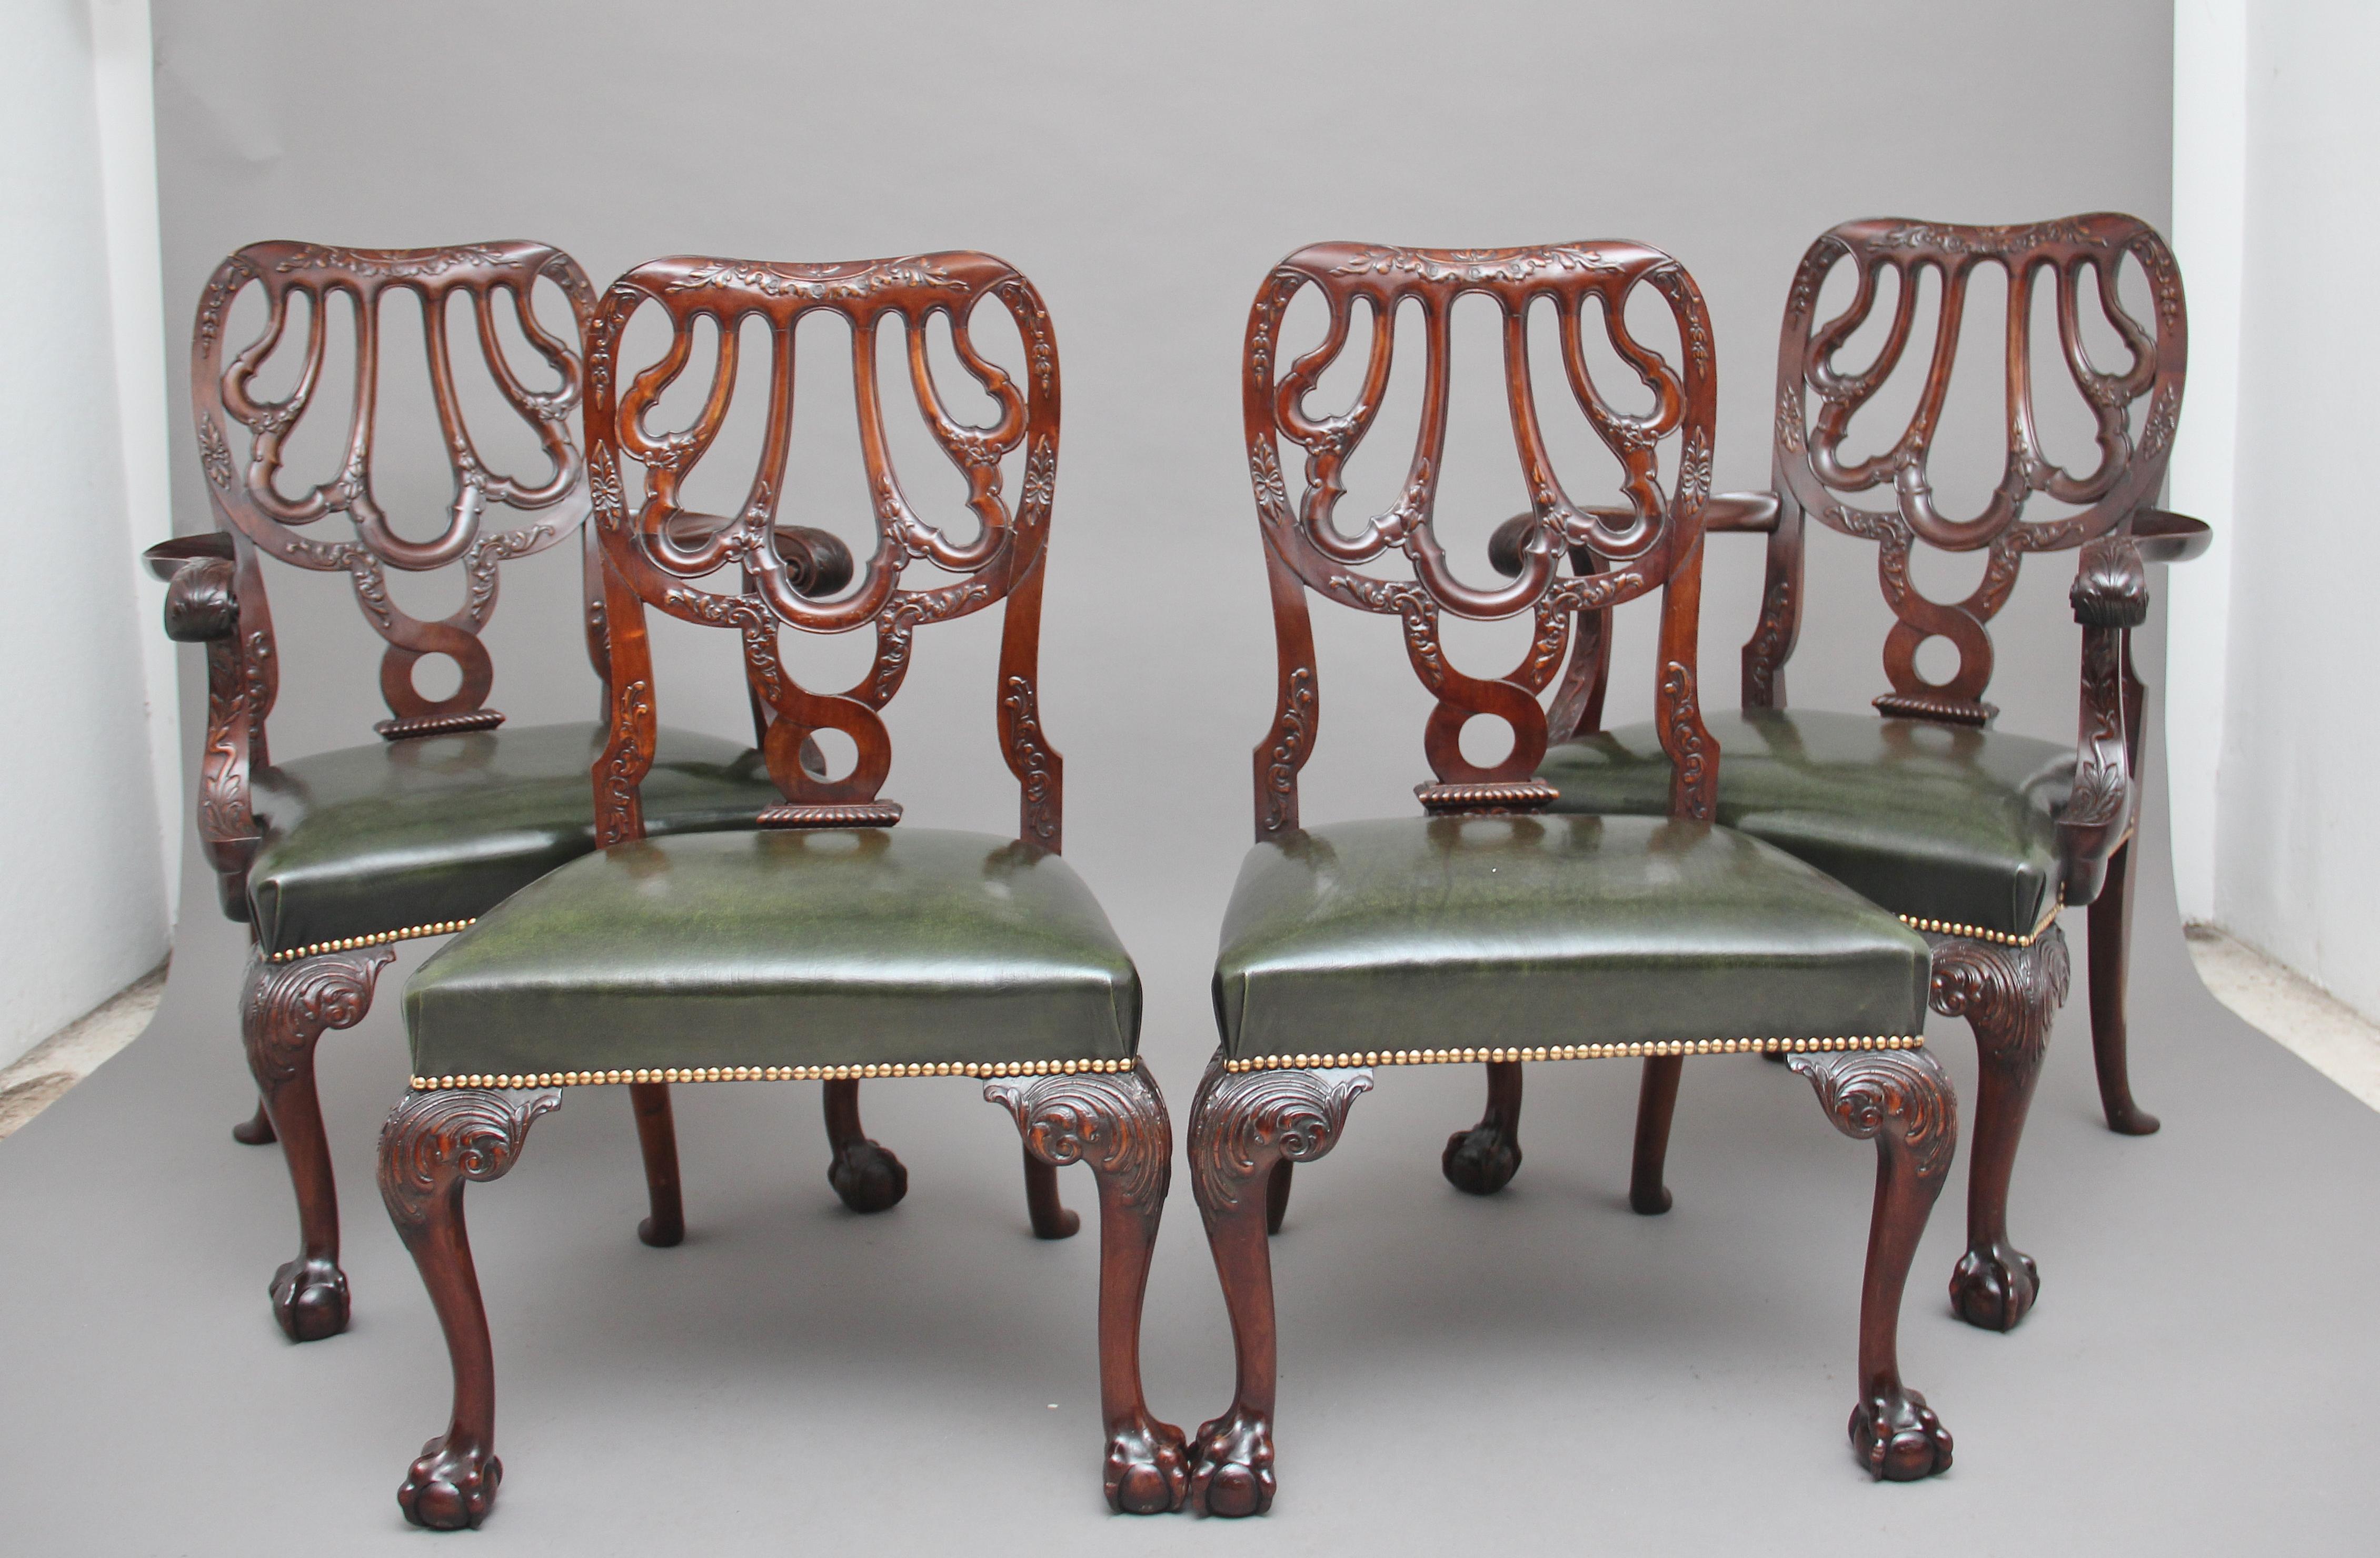 A set of four 19th century carved mahogany chairs in the Chippendale style, consisting of two armchairs and two side chairs, superb quality and lovely dense timber, having carved and shaped backs with flower foliage design, the seats having been